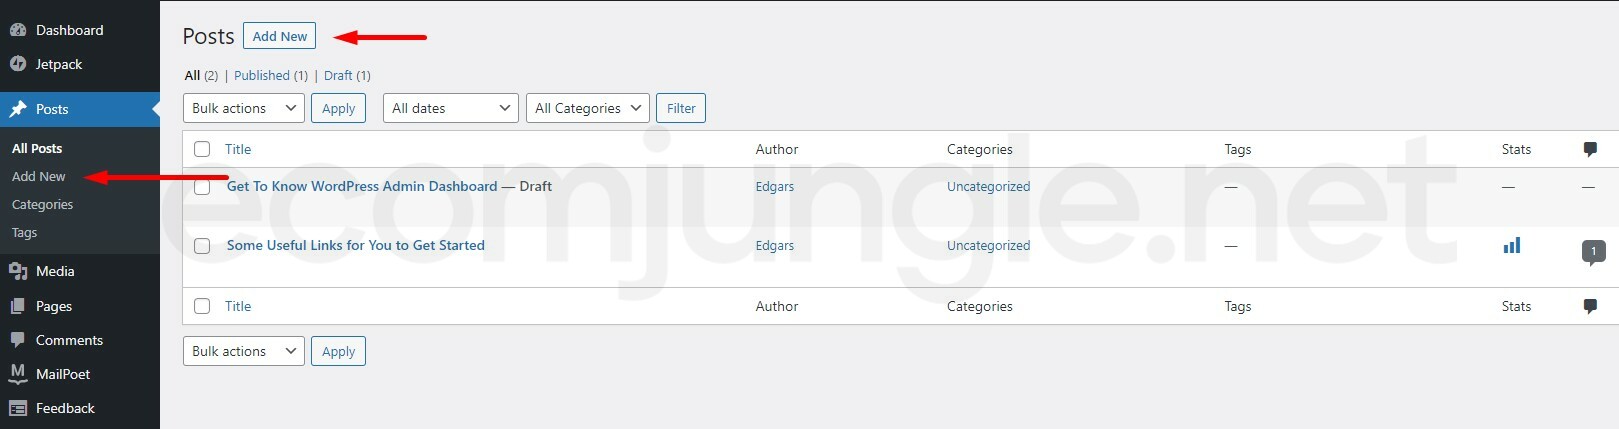 You can click Add New from the navigation menu or click the Add New button on the All Posts page to create a new post